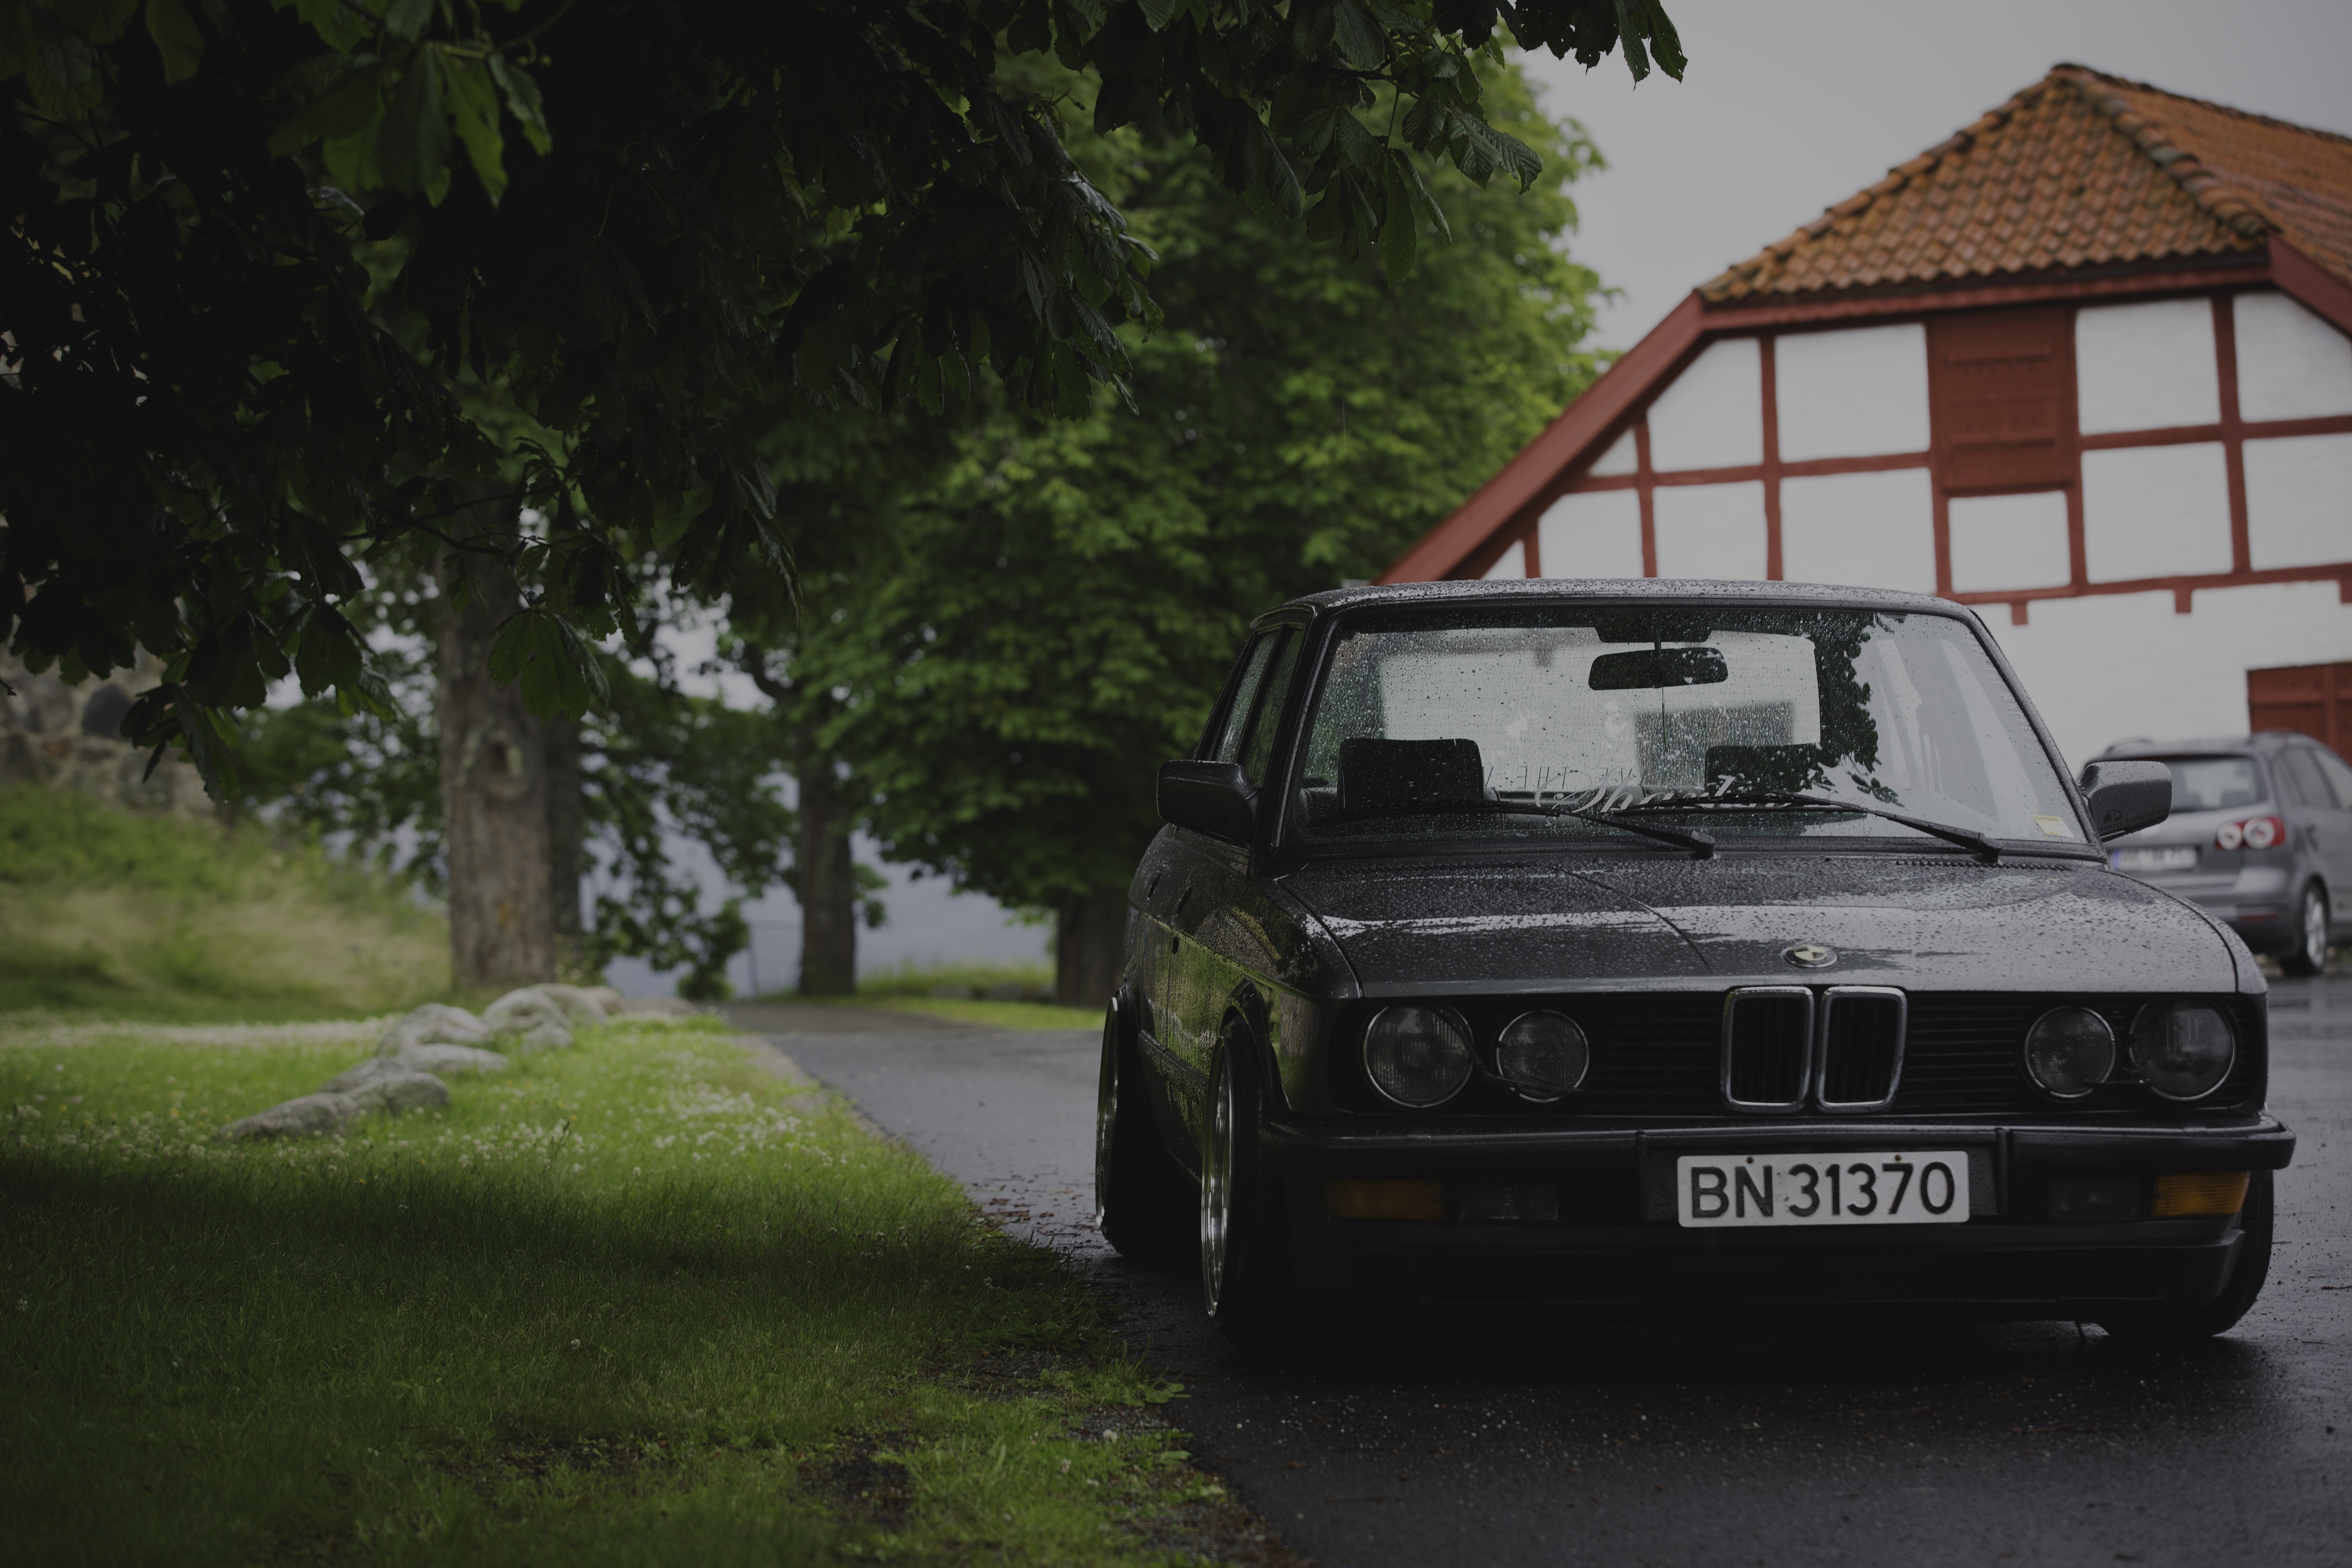 General 5760x3840 BMW E28 Norway summer rain Stance Stanceworks low BMW 5 Series car vehicle numbers black cars BMW